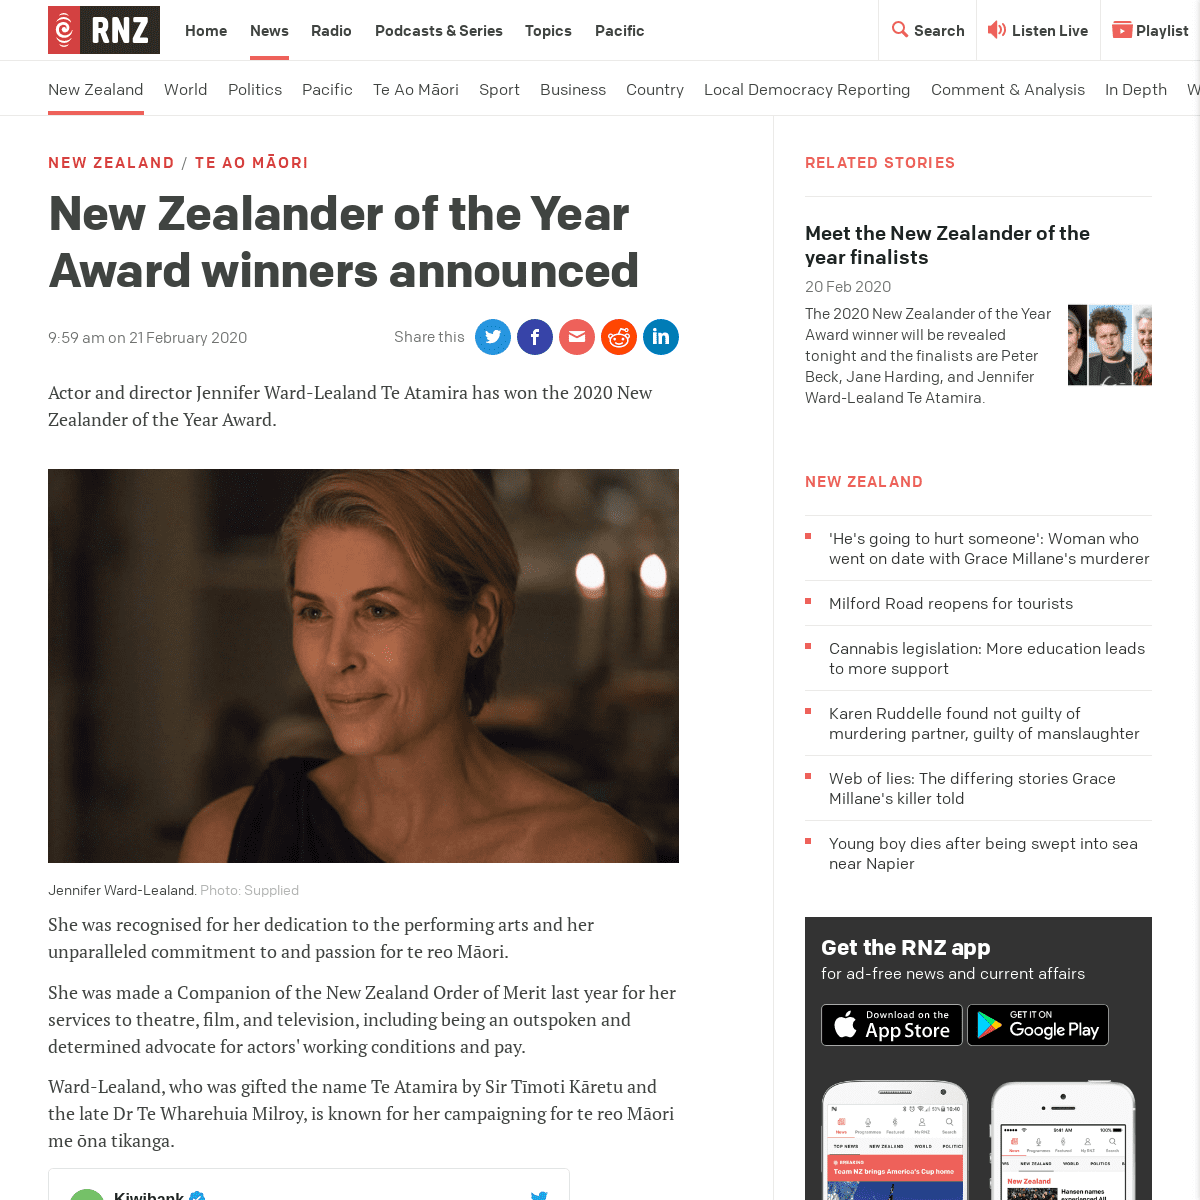 A complete backup of www.rnz.co.nz/news/national/409996/new-zealander-of-the-year-award-winners-announced